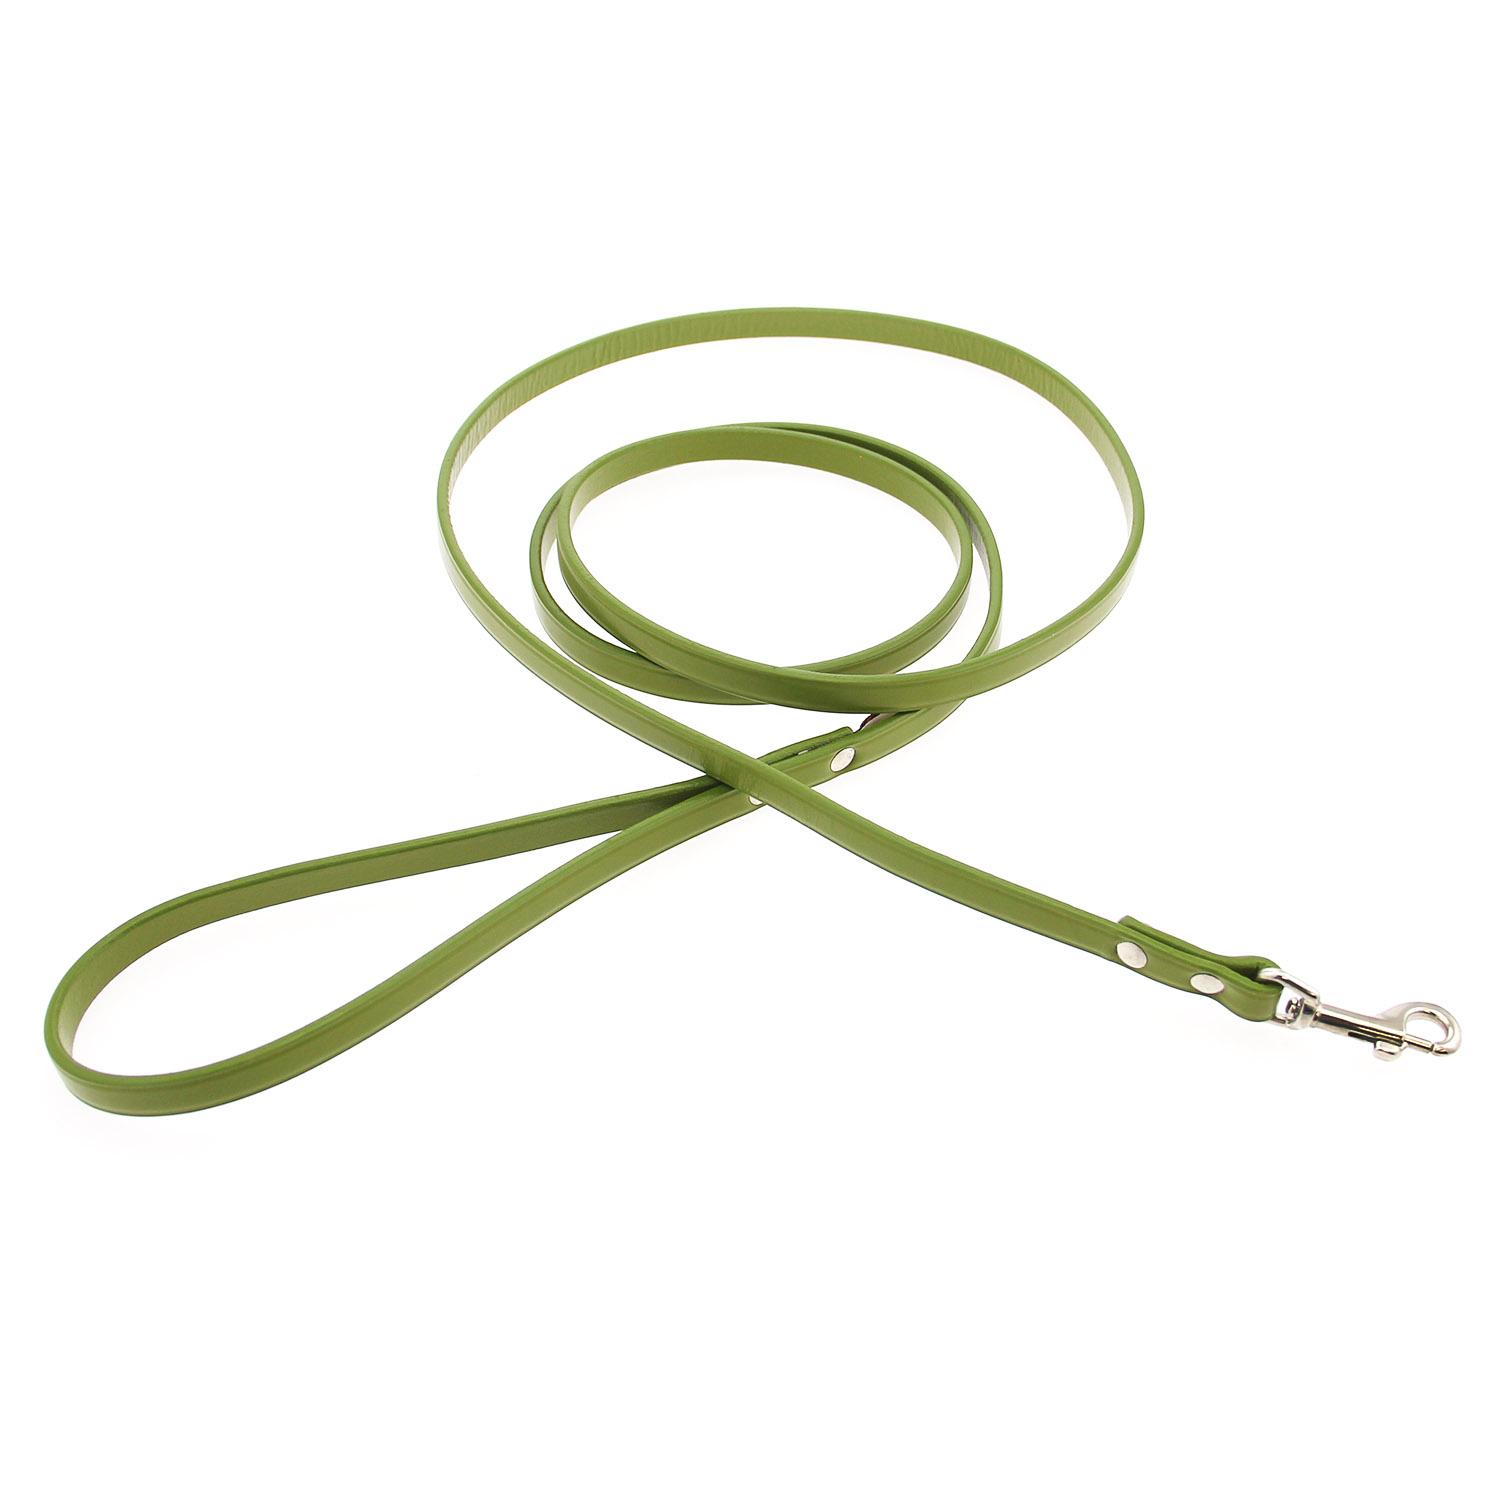 Town Leather Dog Leash by Auburn Leather - Green